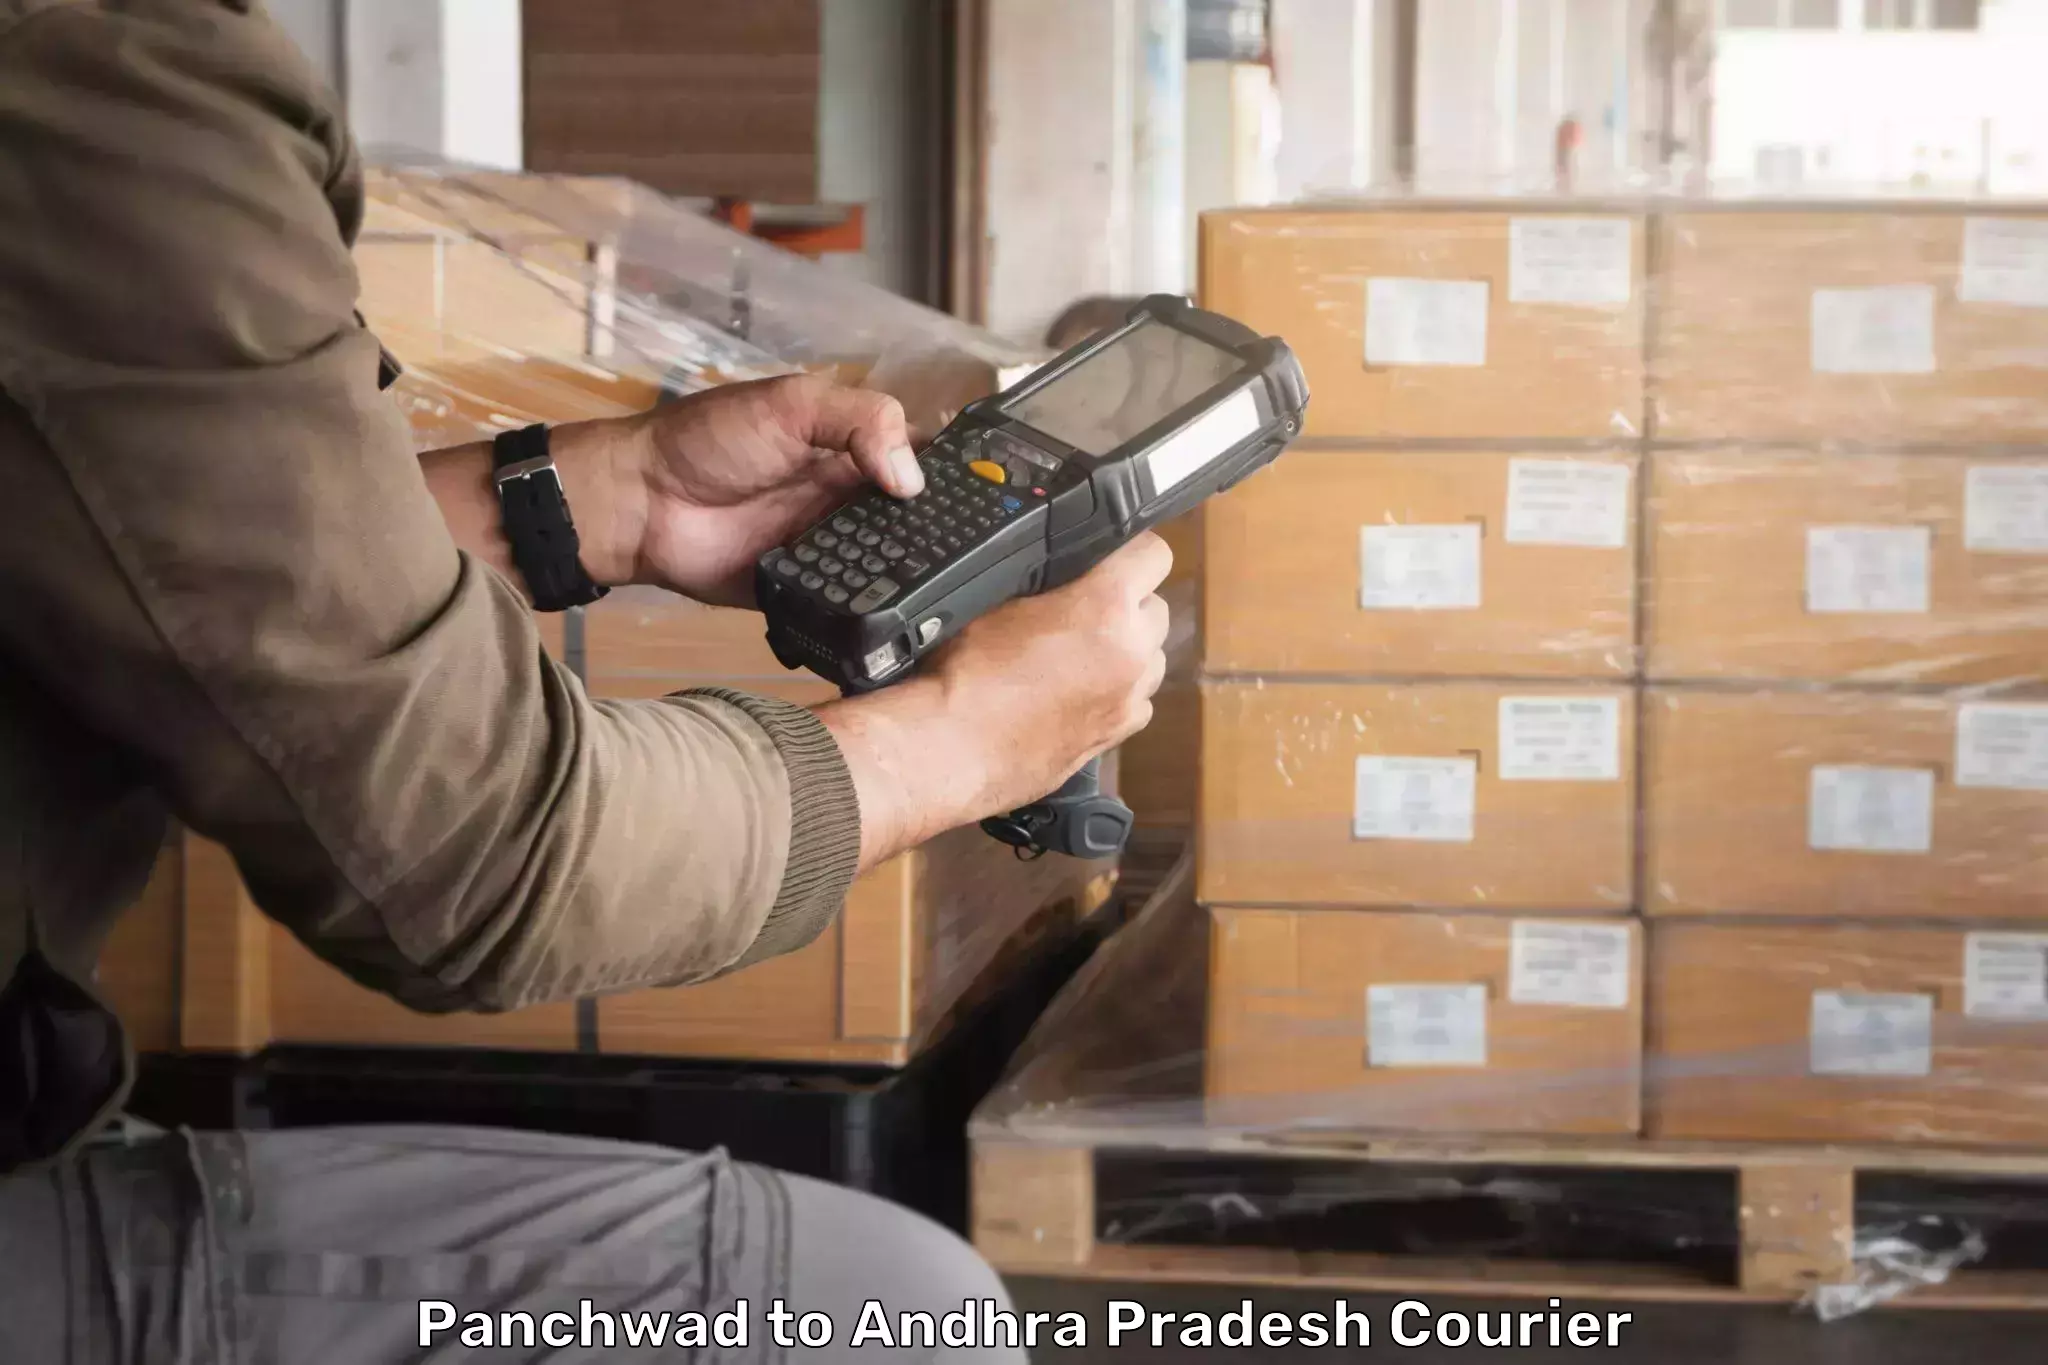 State-of-the-art courier technology Panchwad to Pamarru